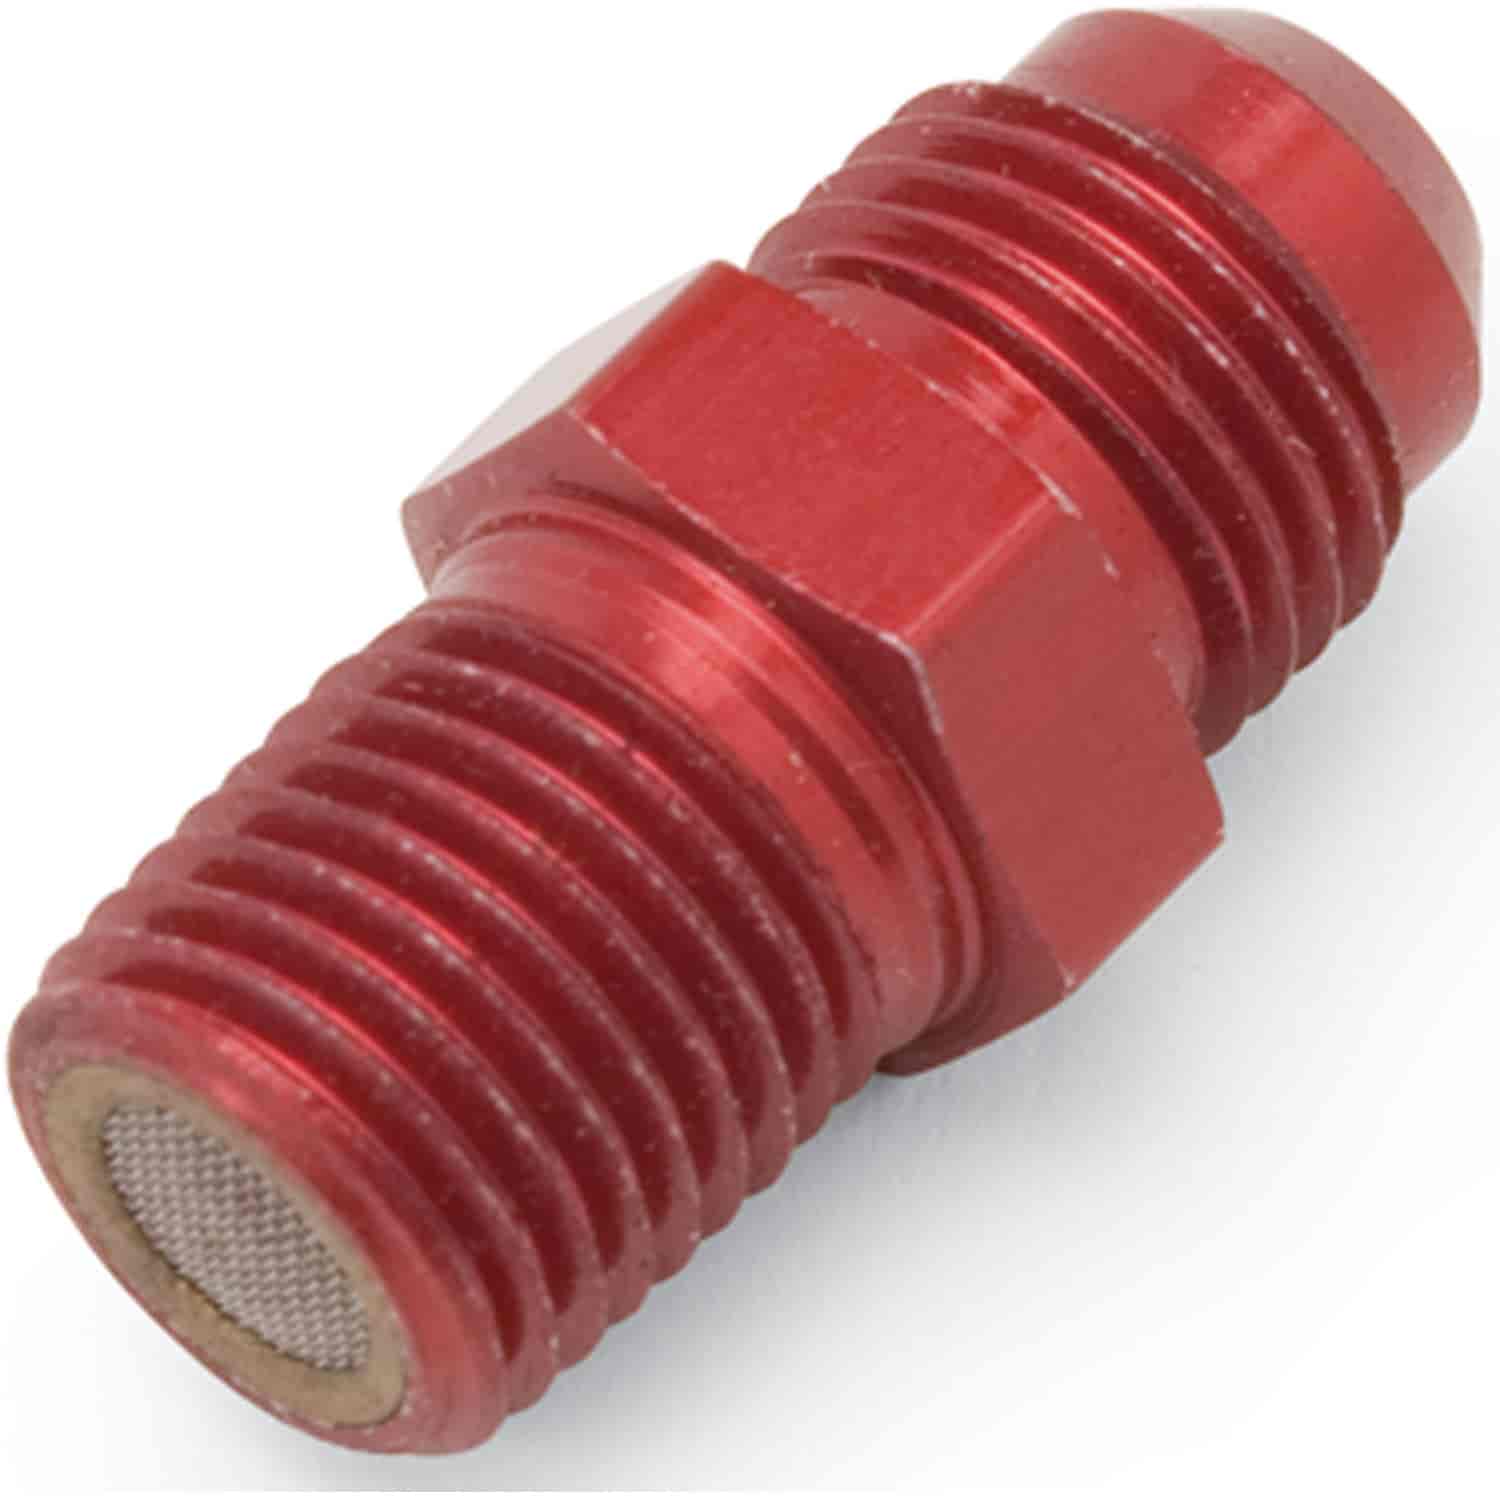 High Pressure Fuel Filter Fitting 6AN X 1/4in NPT in Red